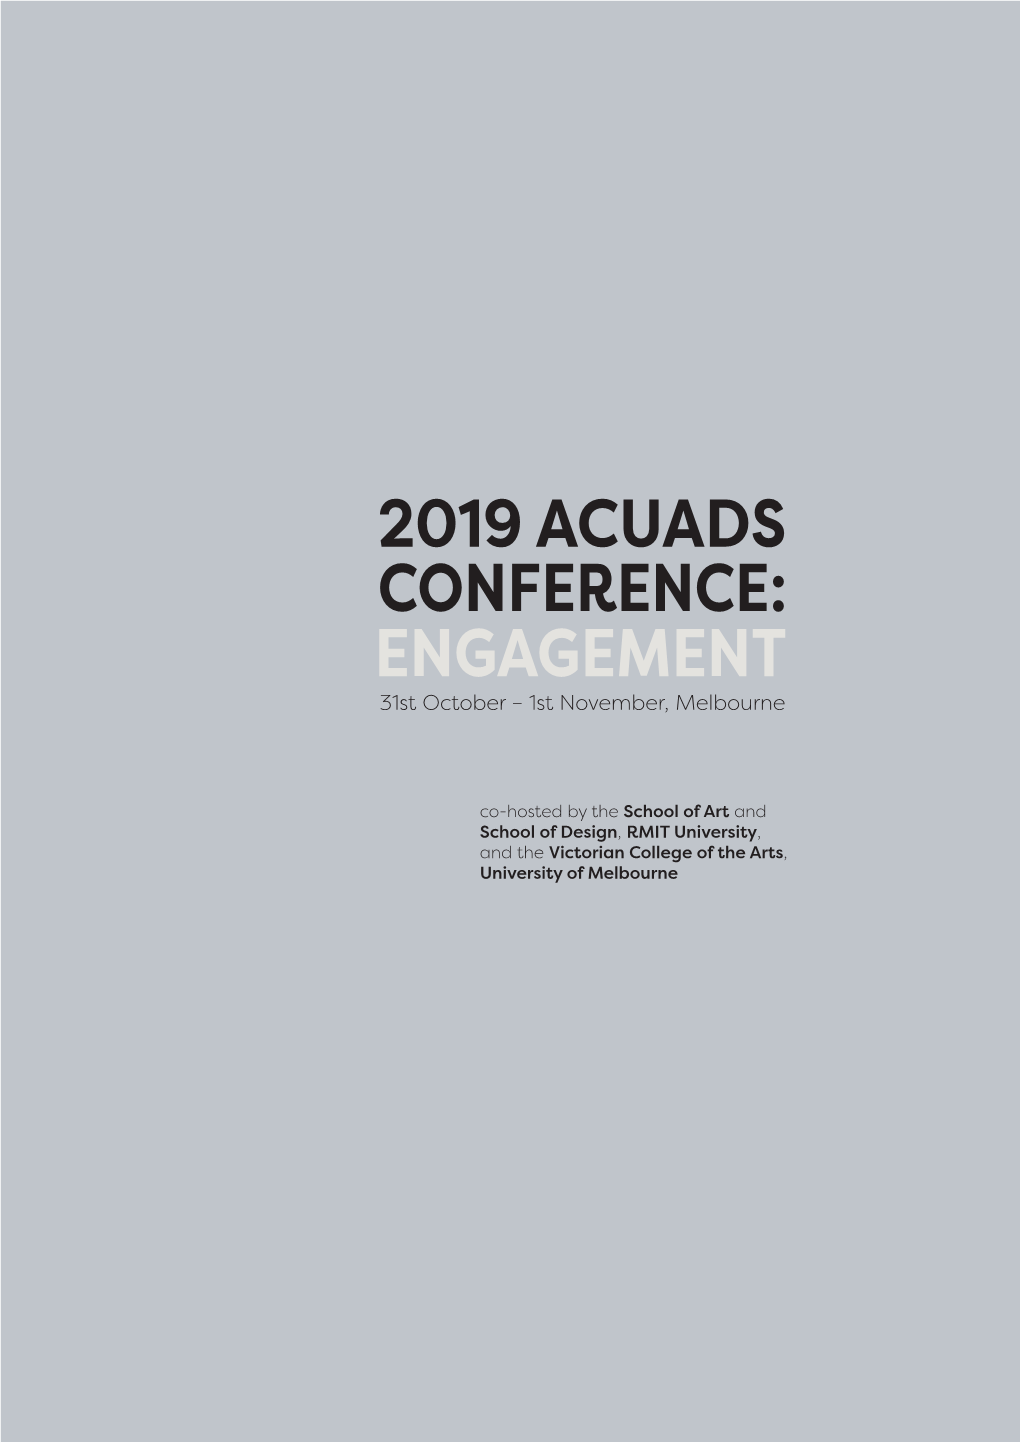 Engagement 2019 Acuads Conference